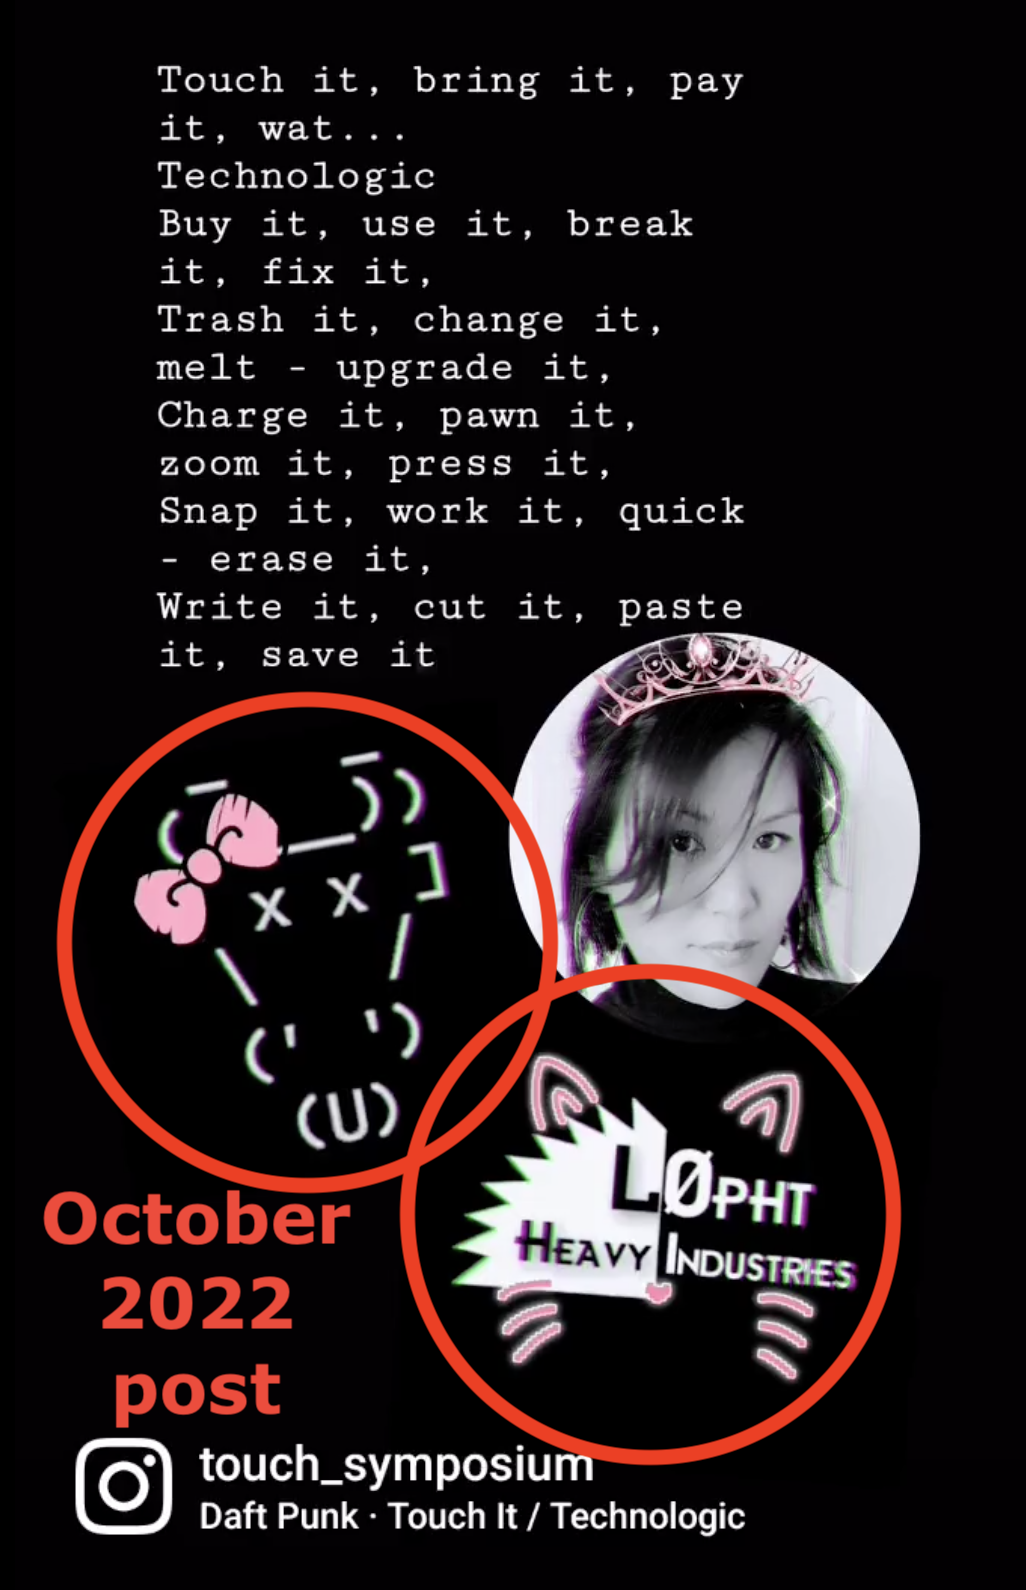 6 Oct 2022 Instagram post from @touch_symposium: It features the cDc ASCII cow skull logo adorned with a pink 'Hello Kitty' hair bow; a L0pht Heavy Industries logo with pink cat ears, whiskers, and nose; and a photo of Caroline Murgue with a matching pink crown on her head. Next to all of this are the lyrics to the Daft Punk track 'Touch It / Technologic'.